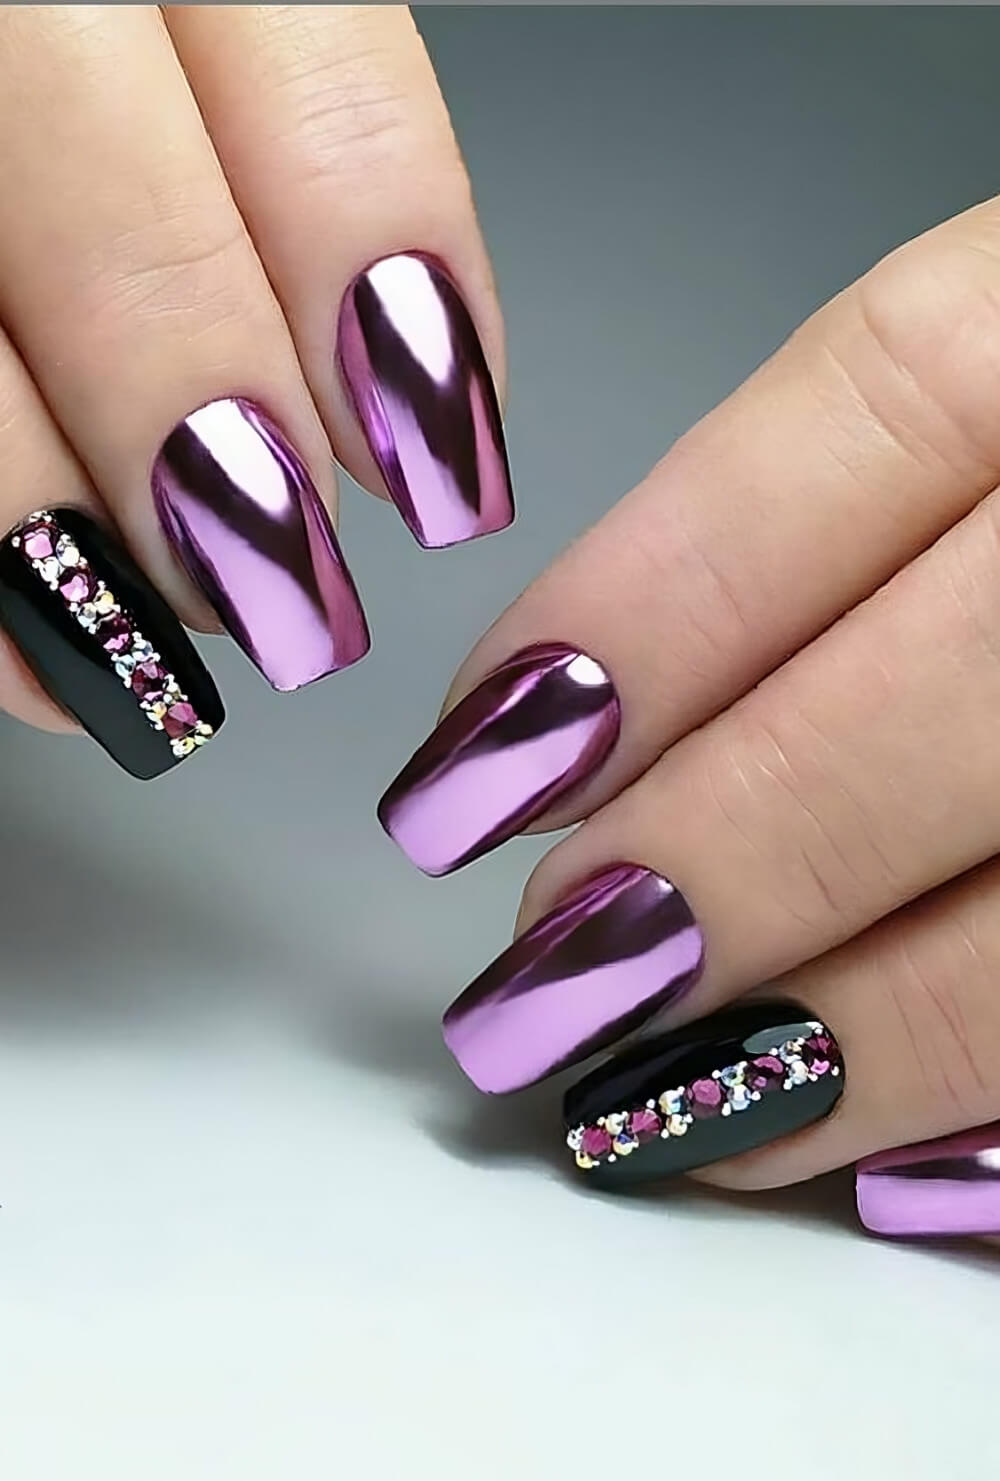 27 Breathtaking Chrome Nails For Your Special Night - 173